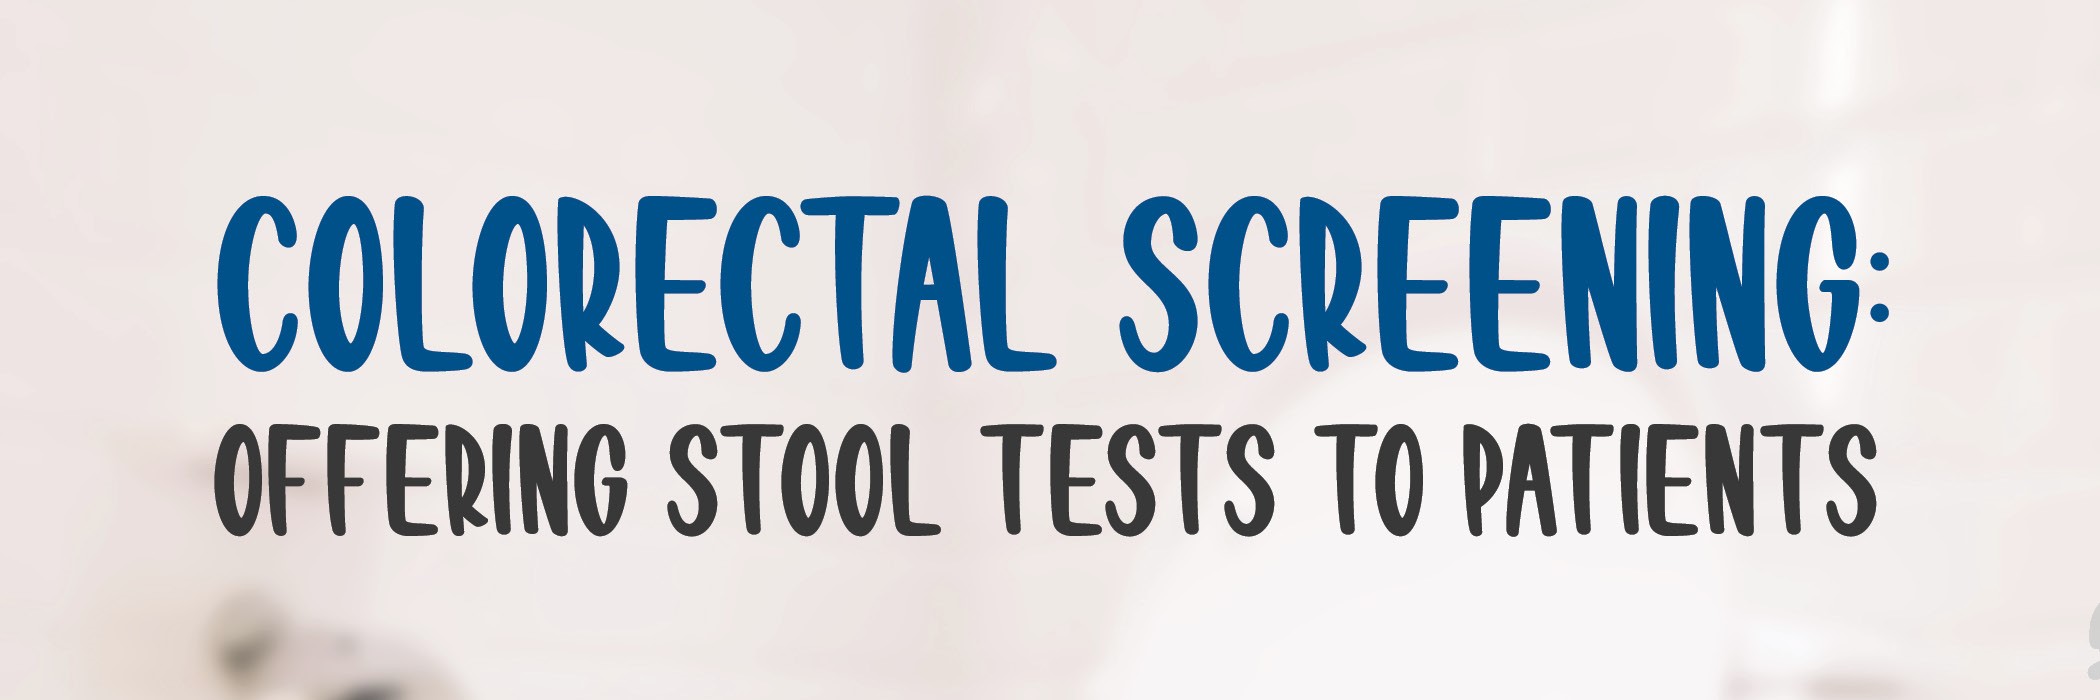 Colorectal Screening: Offering stool tests to Patients during the Pandemic